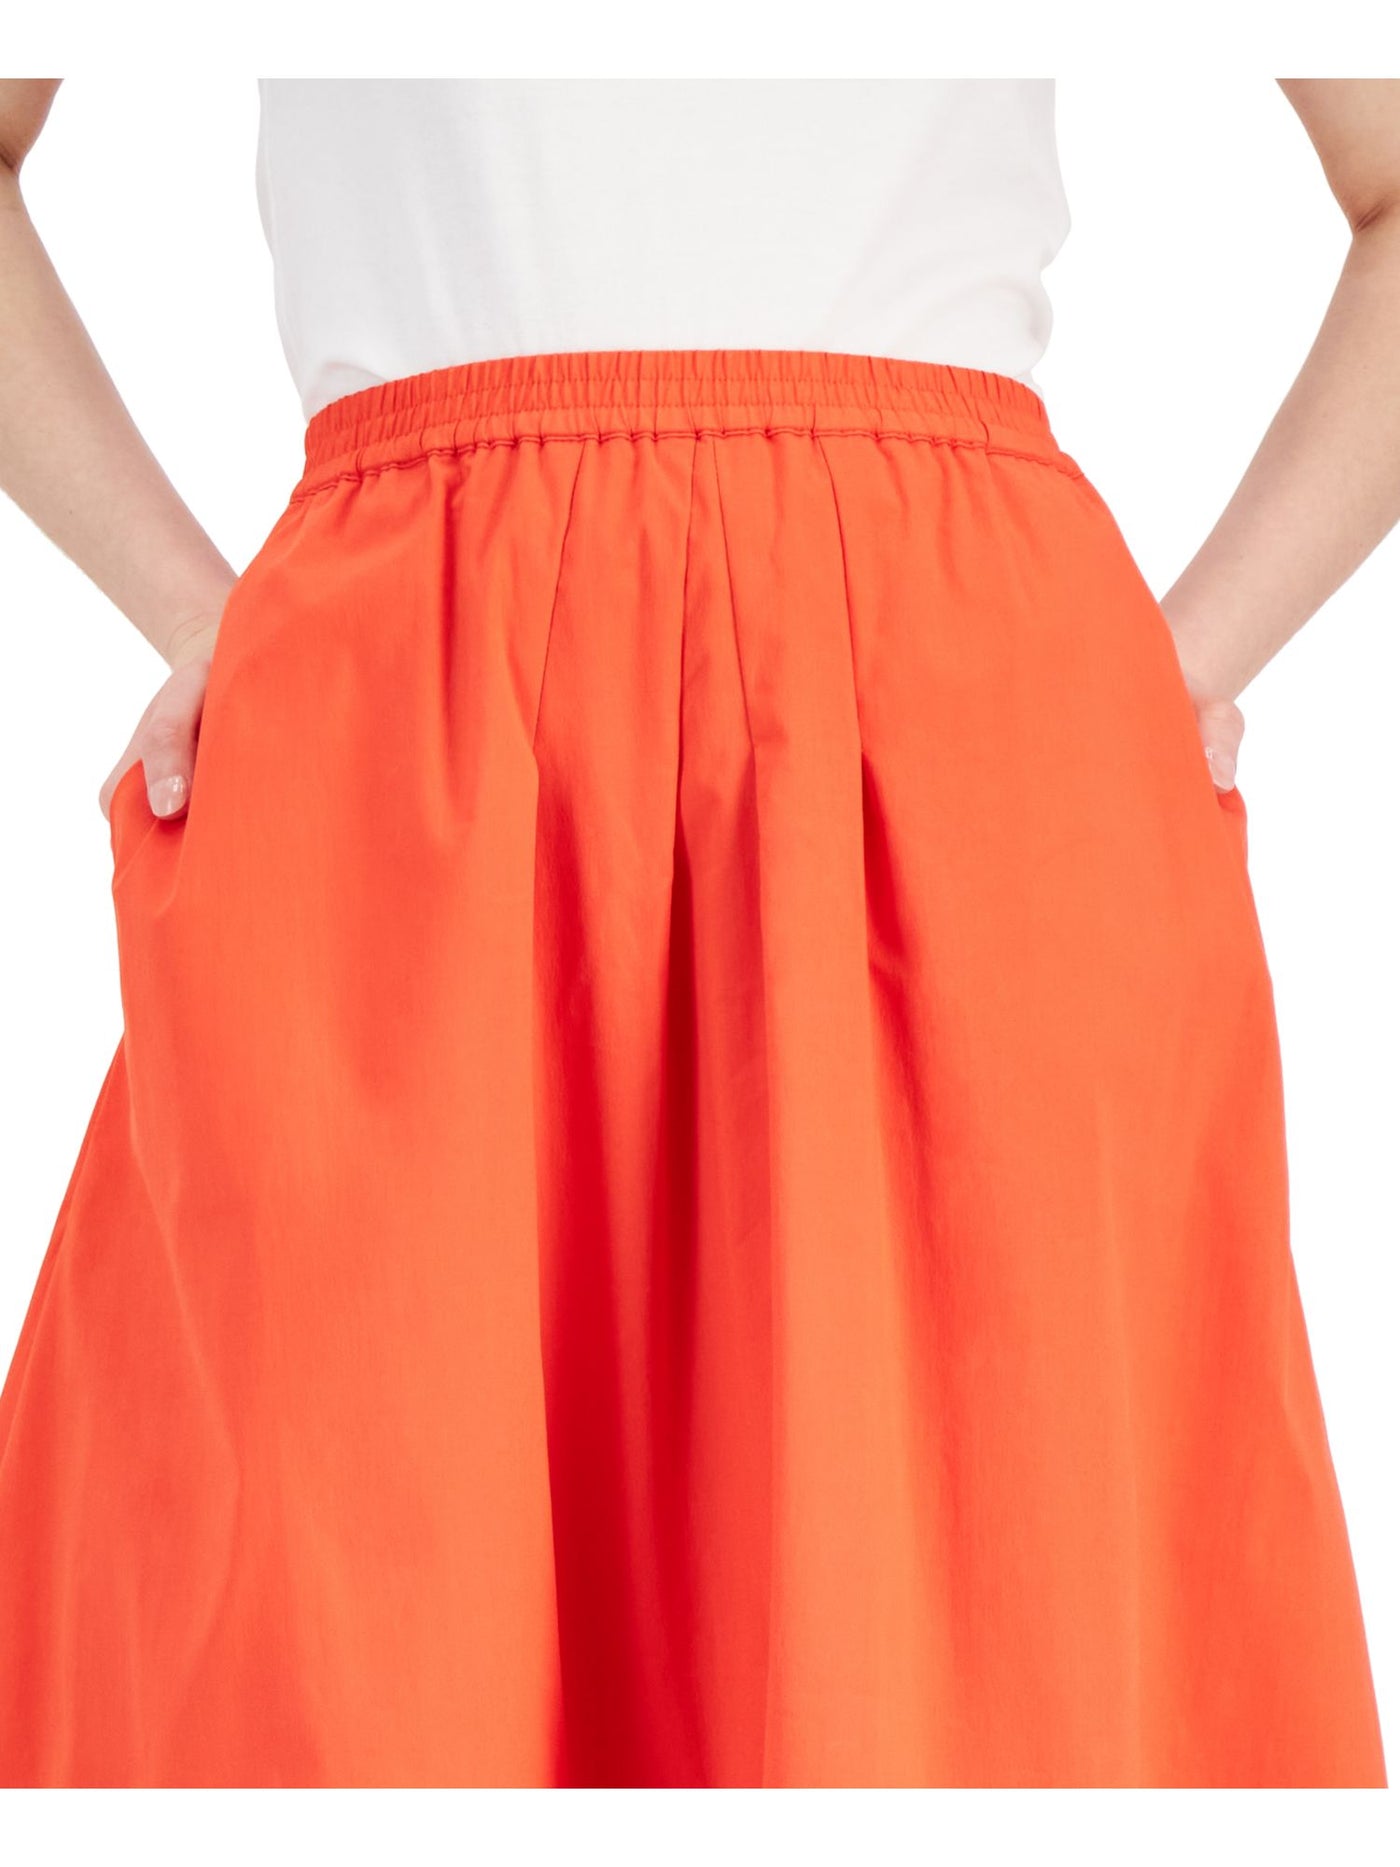 DONNA KARAN NEW YORK Womens Orange Pocketed Lined Elastic Waist Pull On Pleated Below The Knee A-Line Skirt M